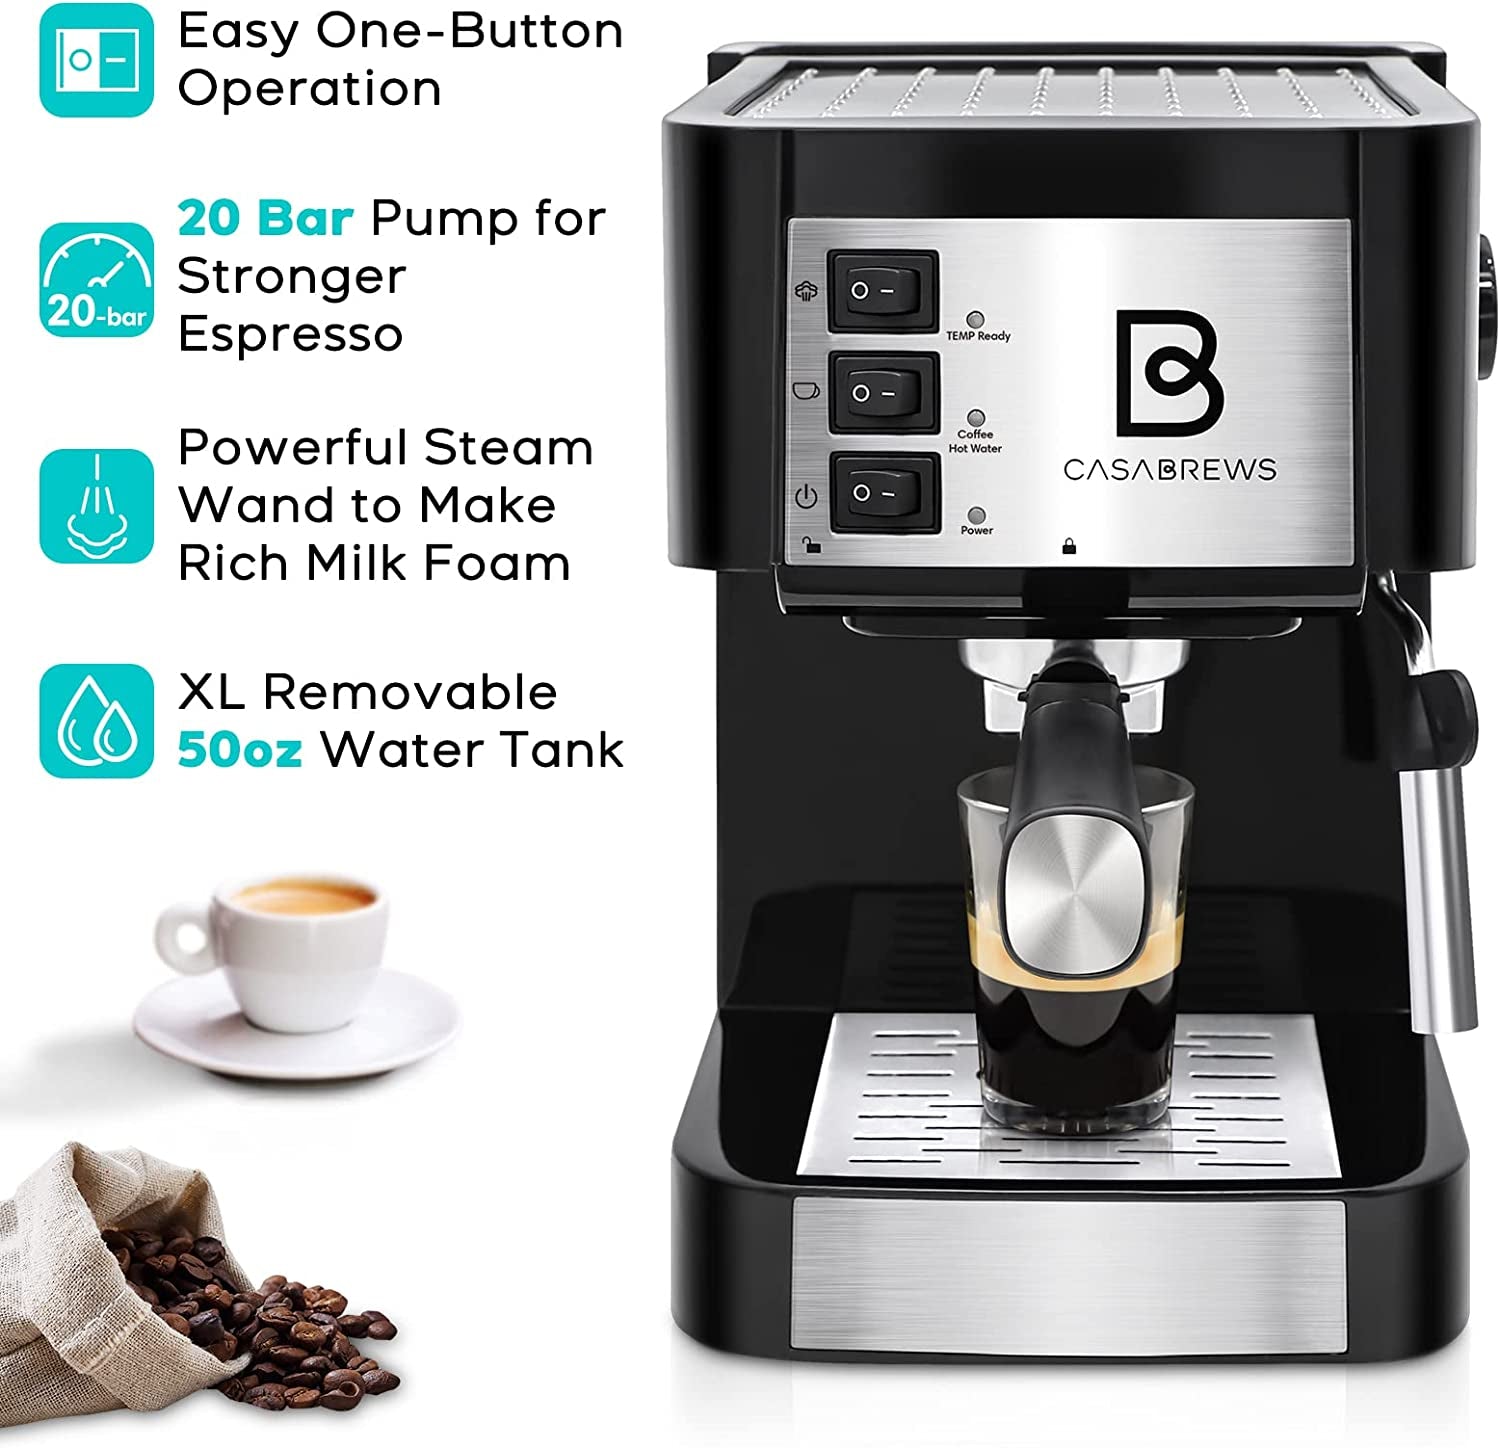 CASABREWS 20 Bar Espresso Machine with Milk Frother and Removable Water Tank - Gift for Coffee Lovers